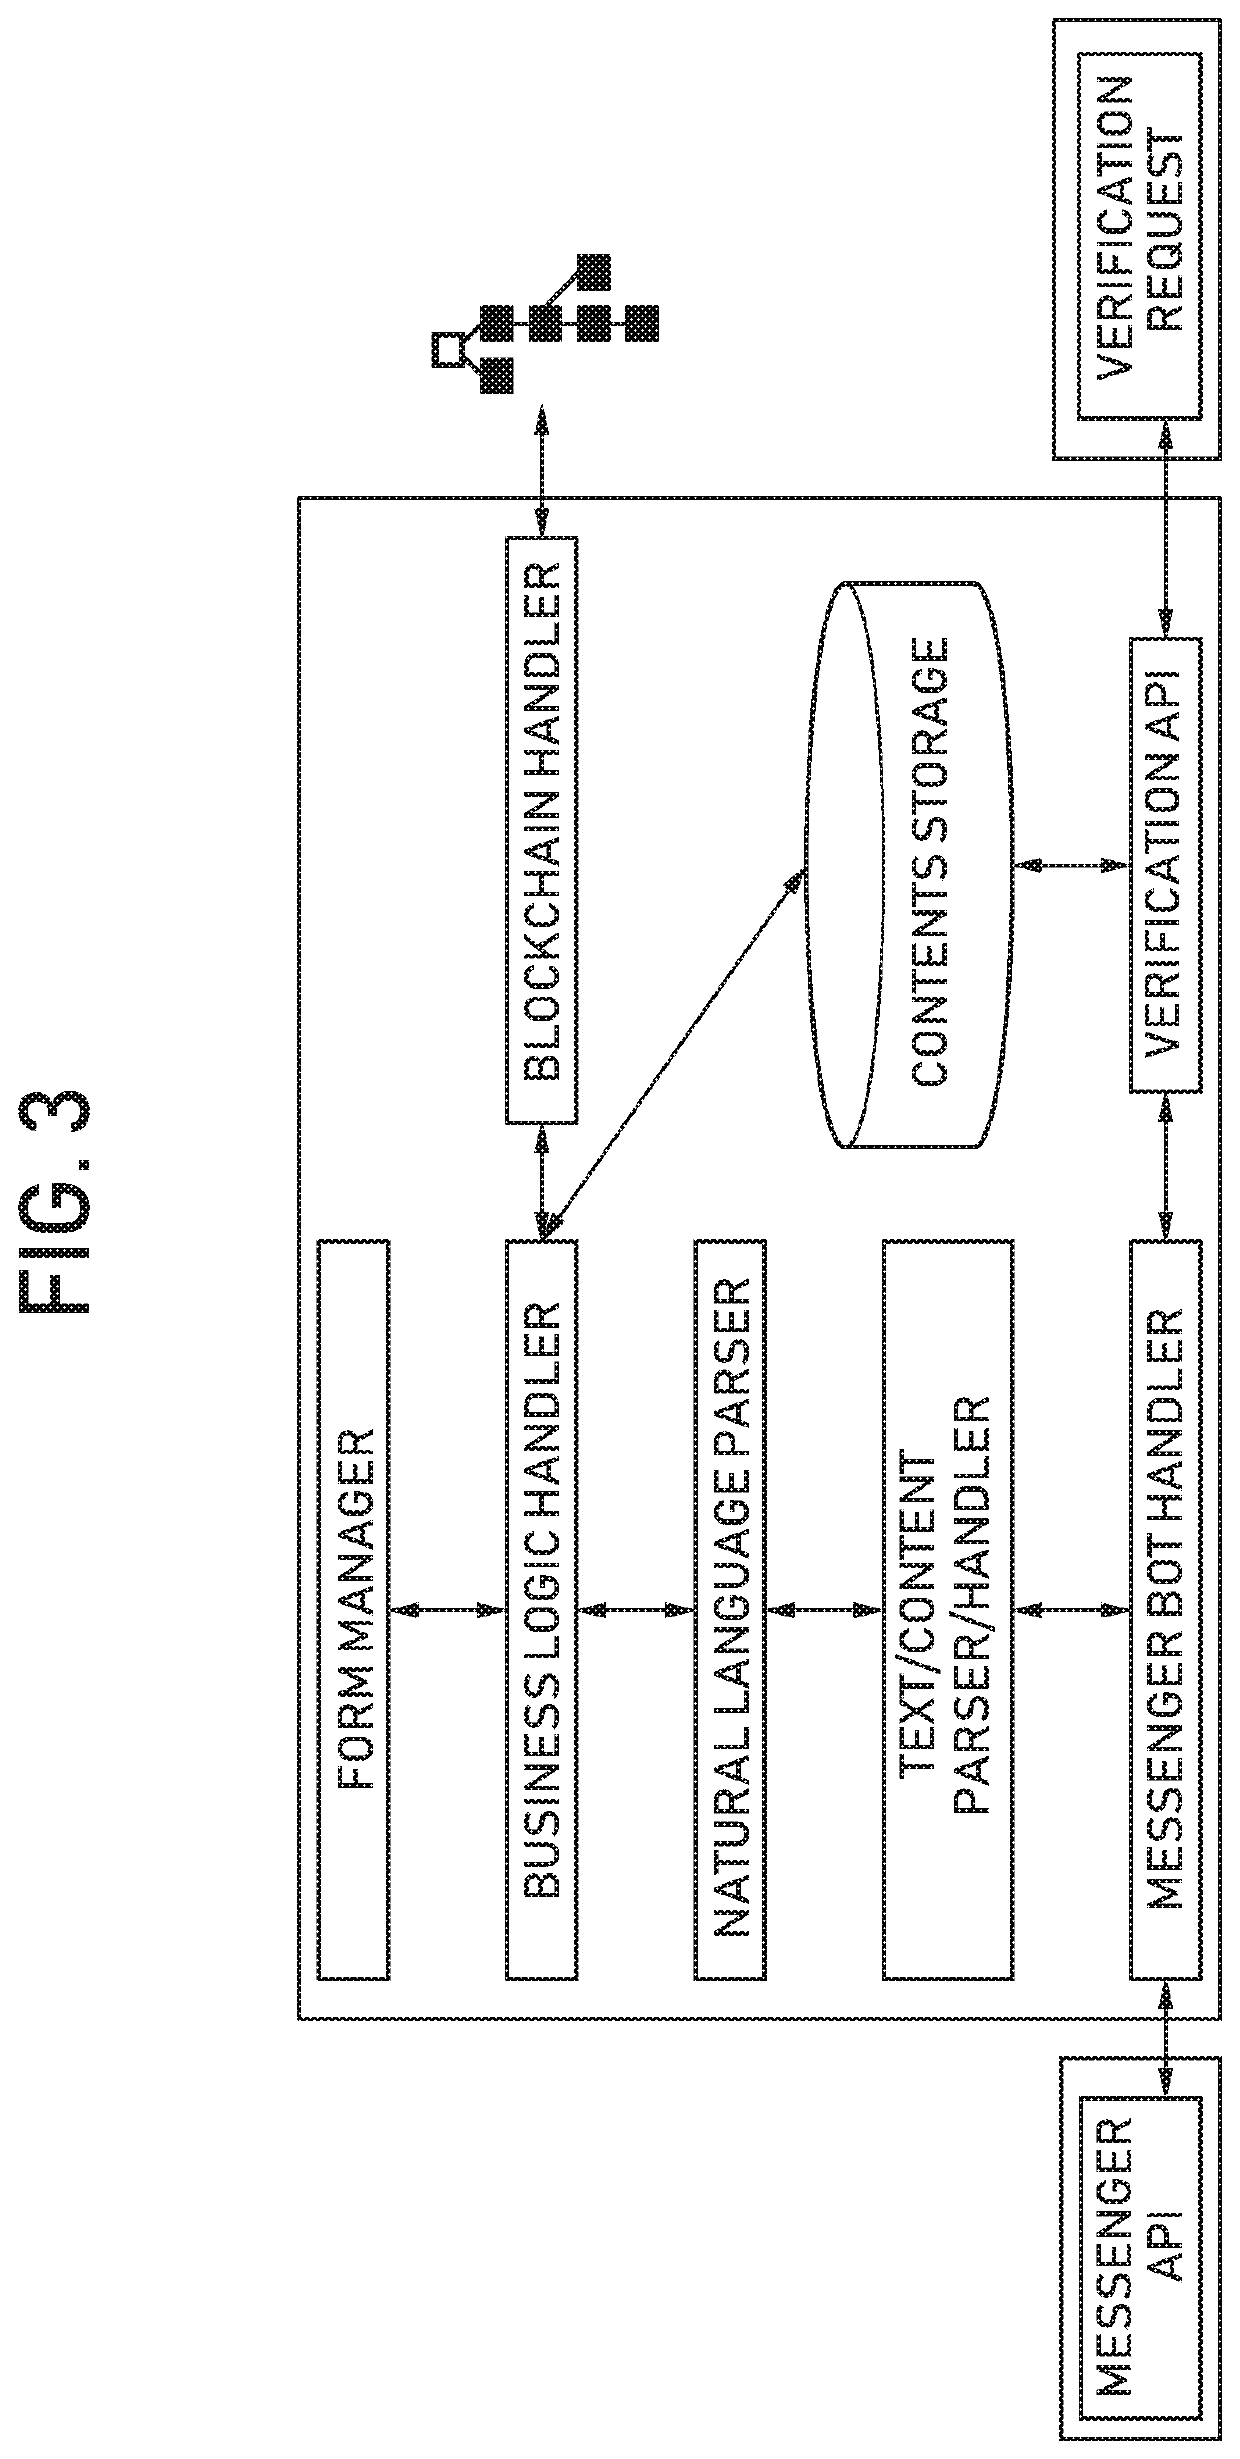 Method for providing recording and verification service for data received and transmitted by messenger service, and server using method